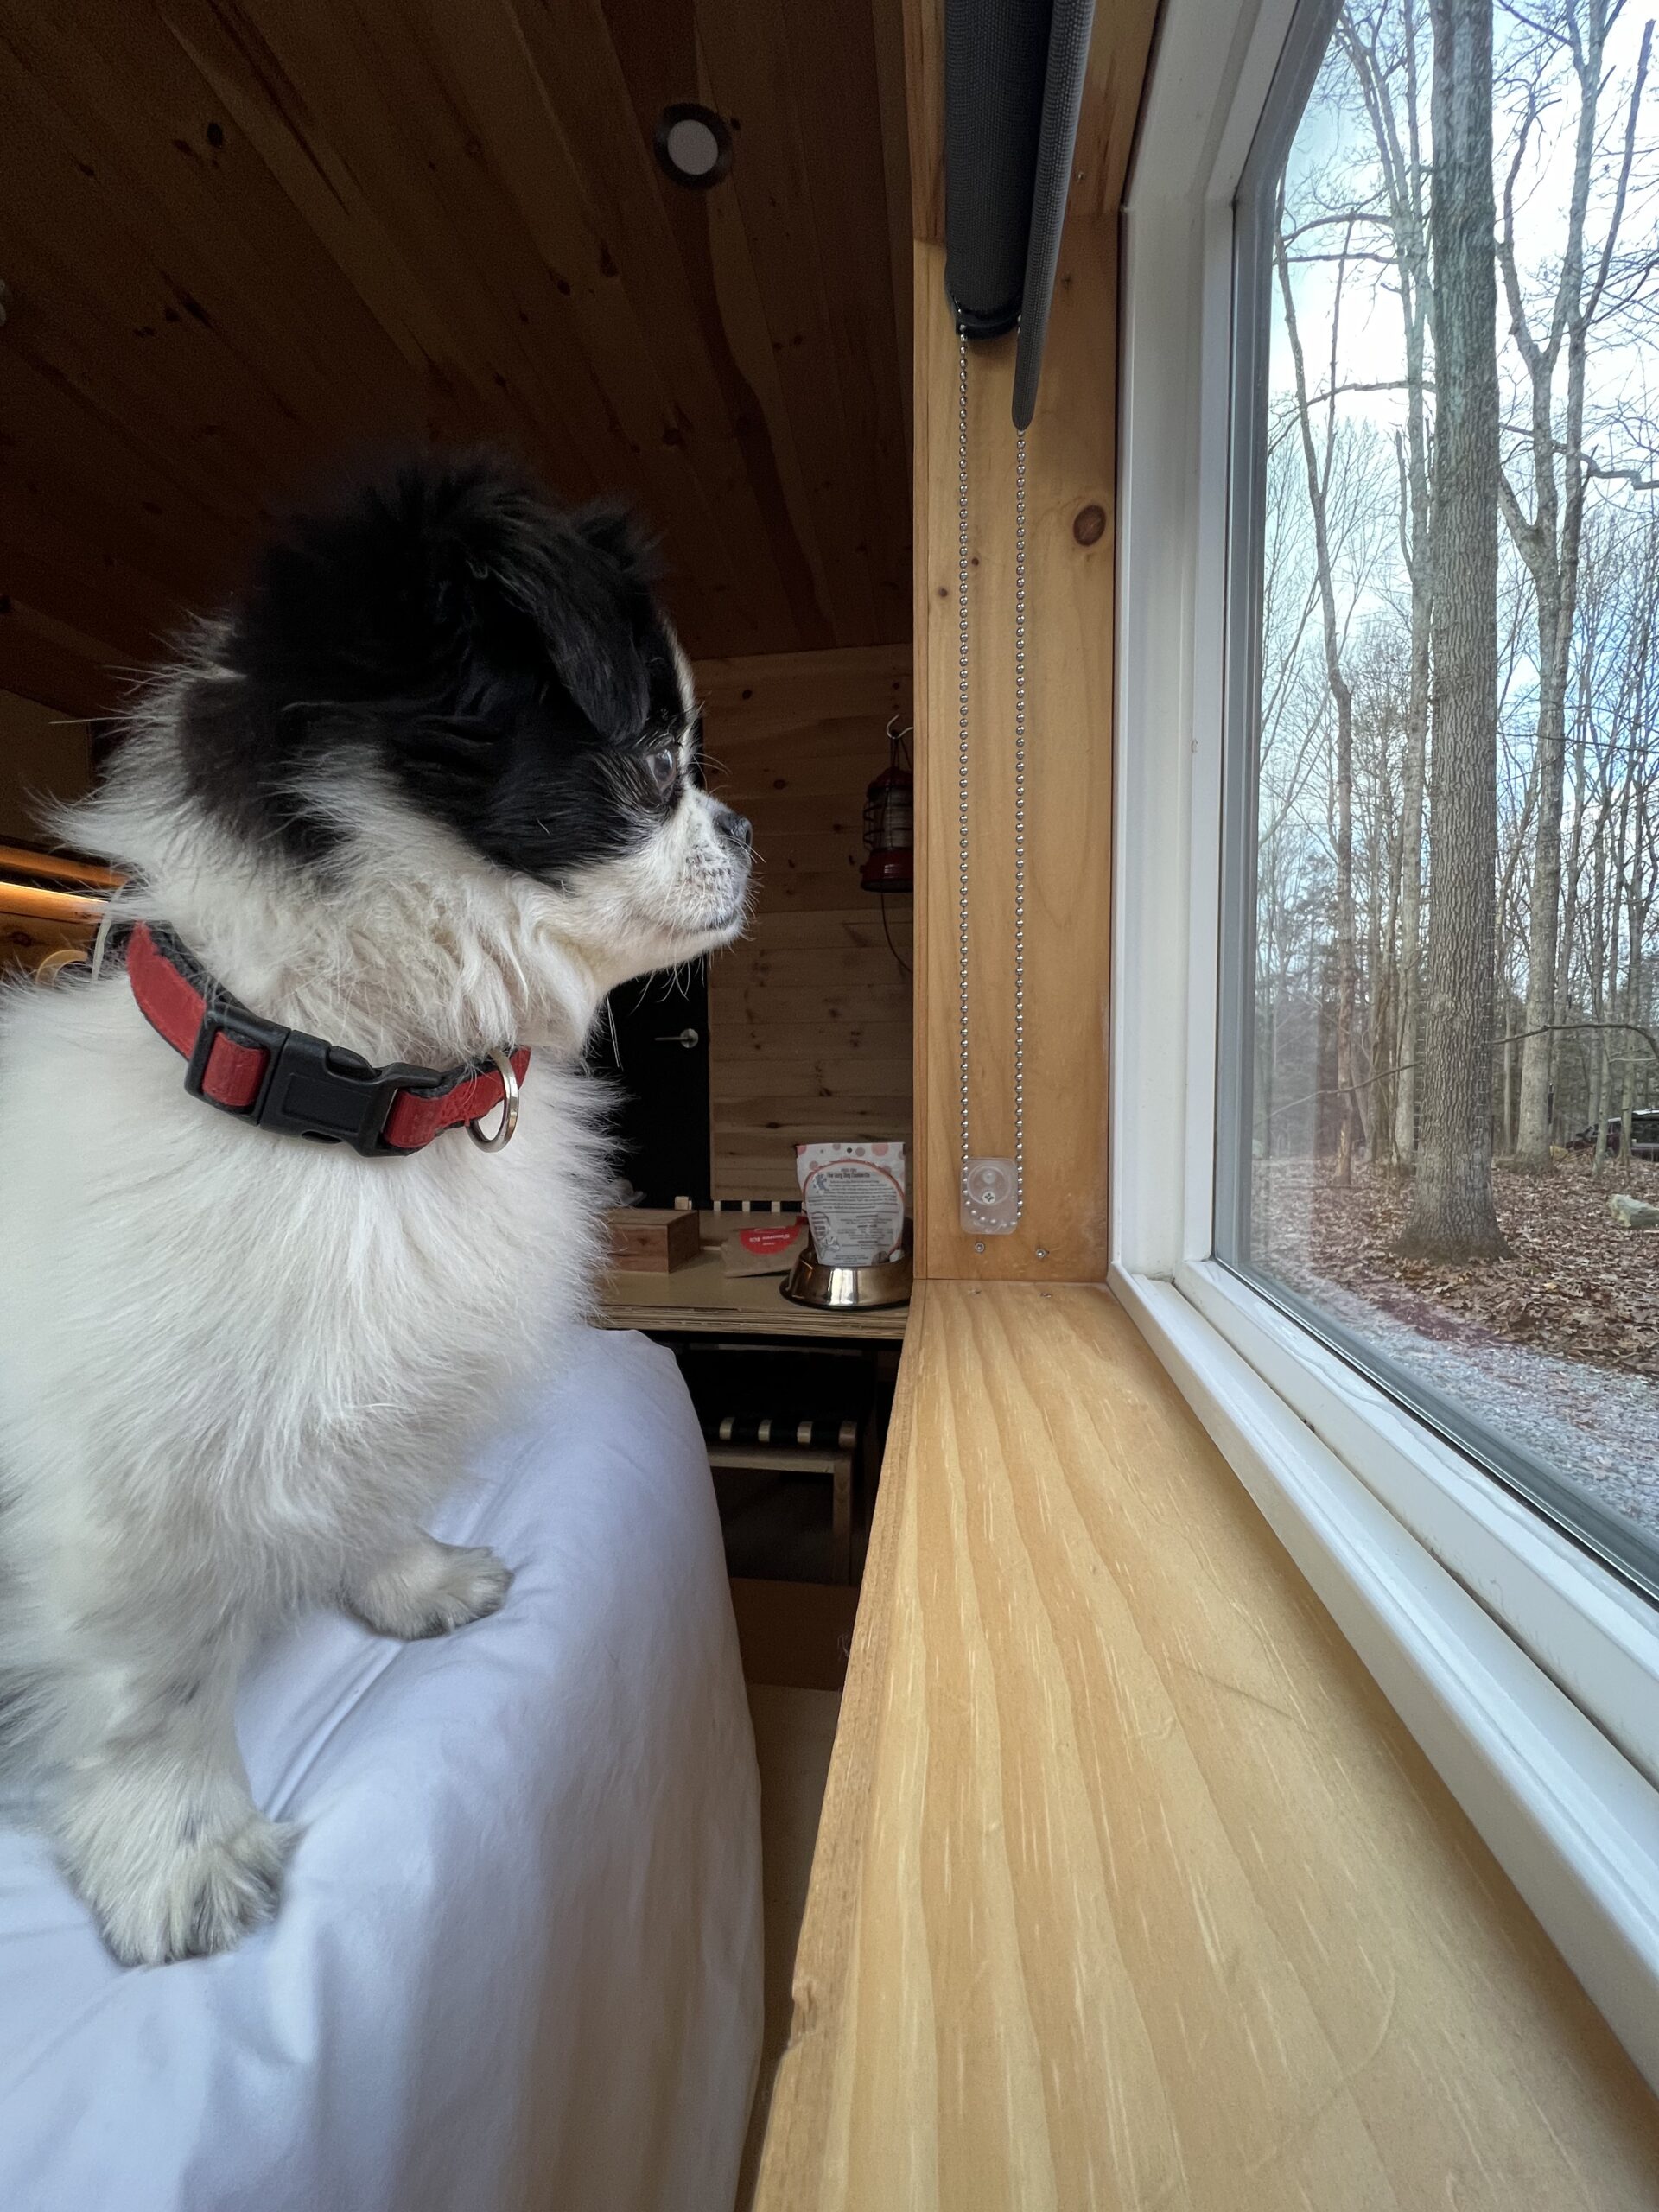 The author's dog looking out the window.